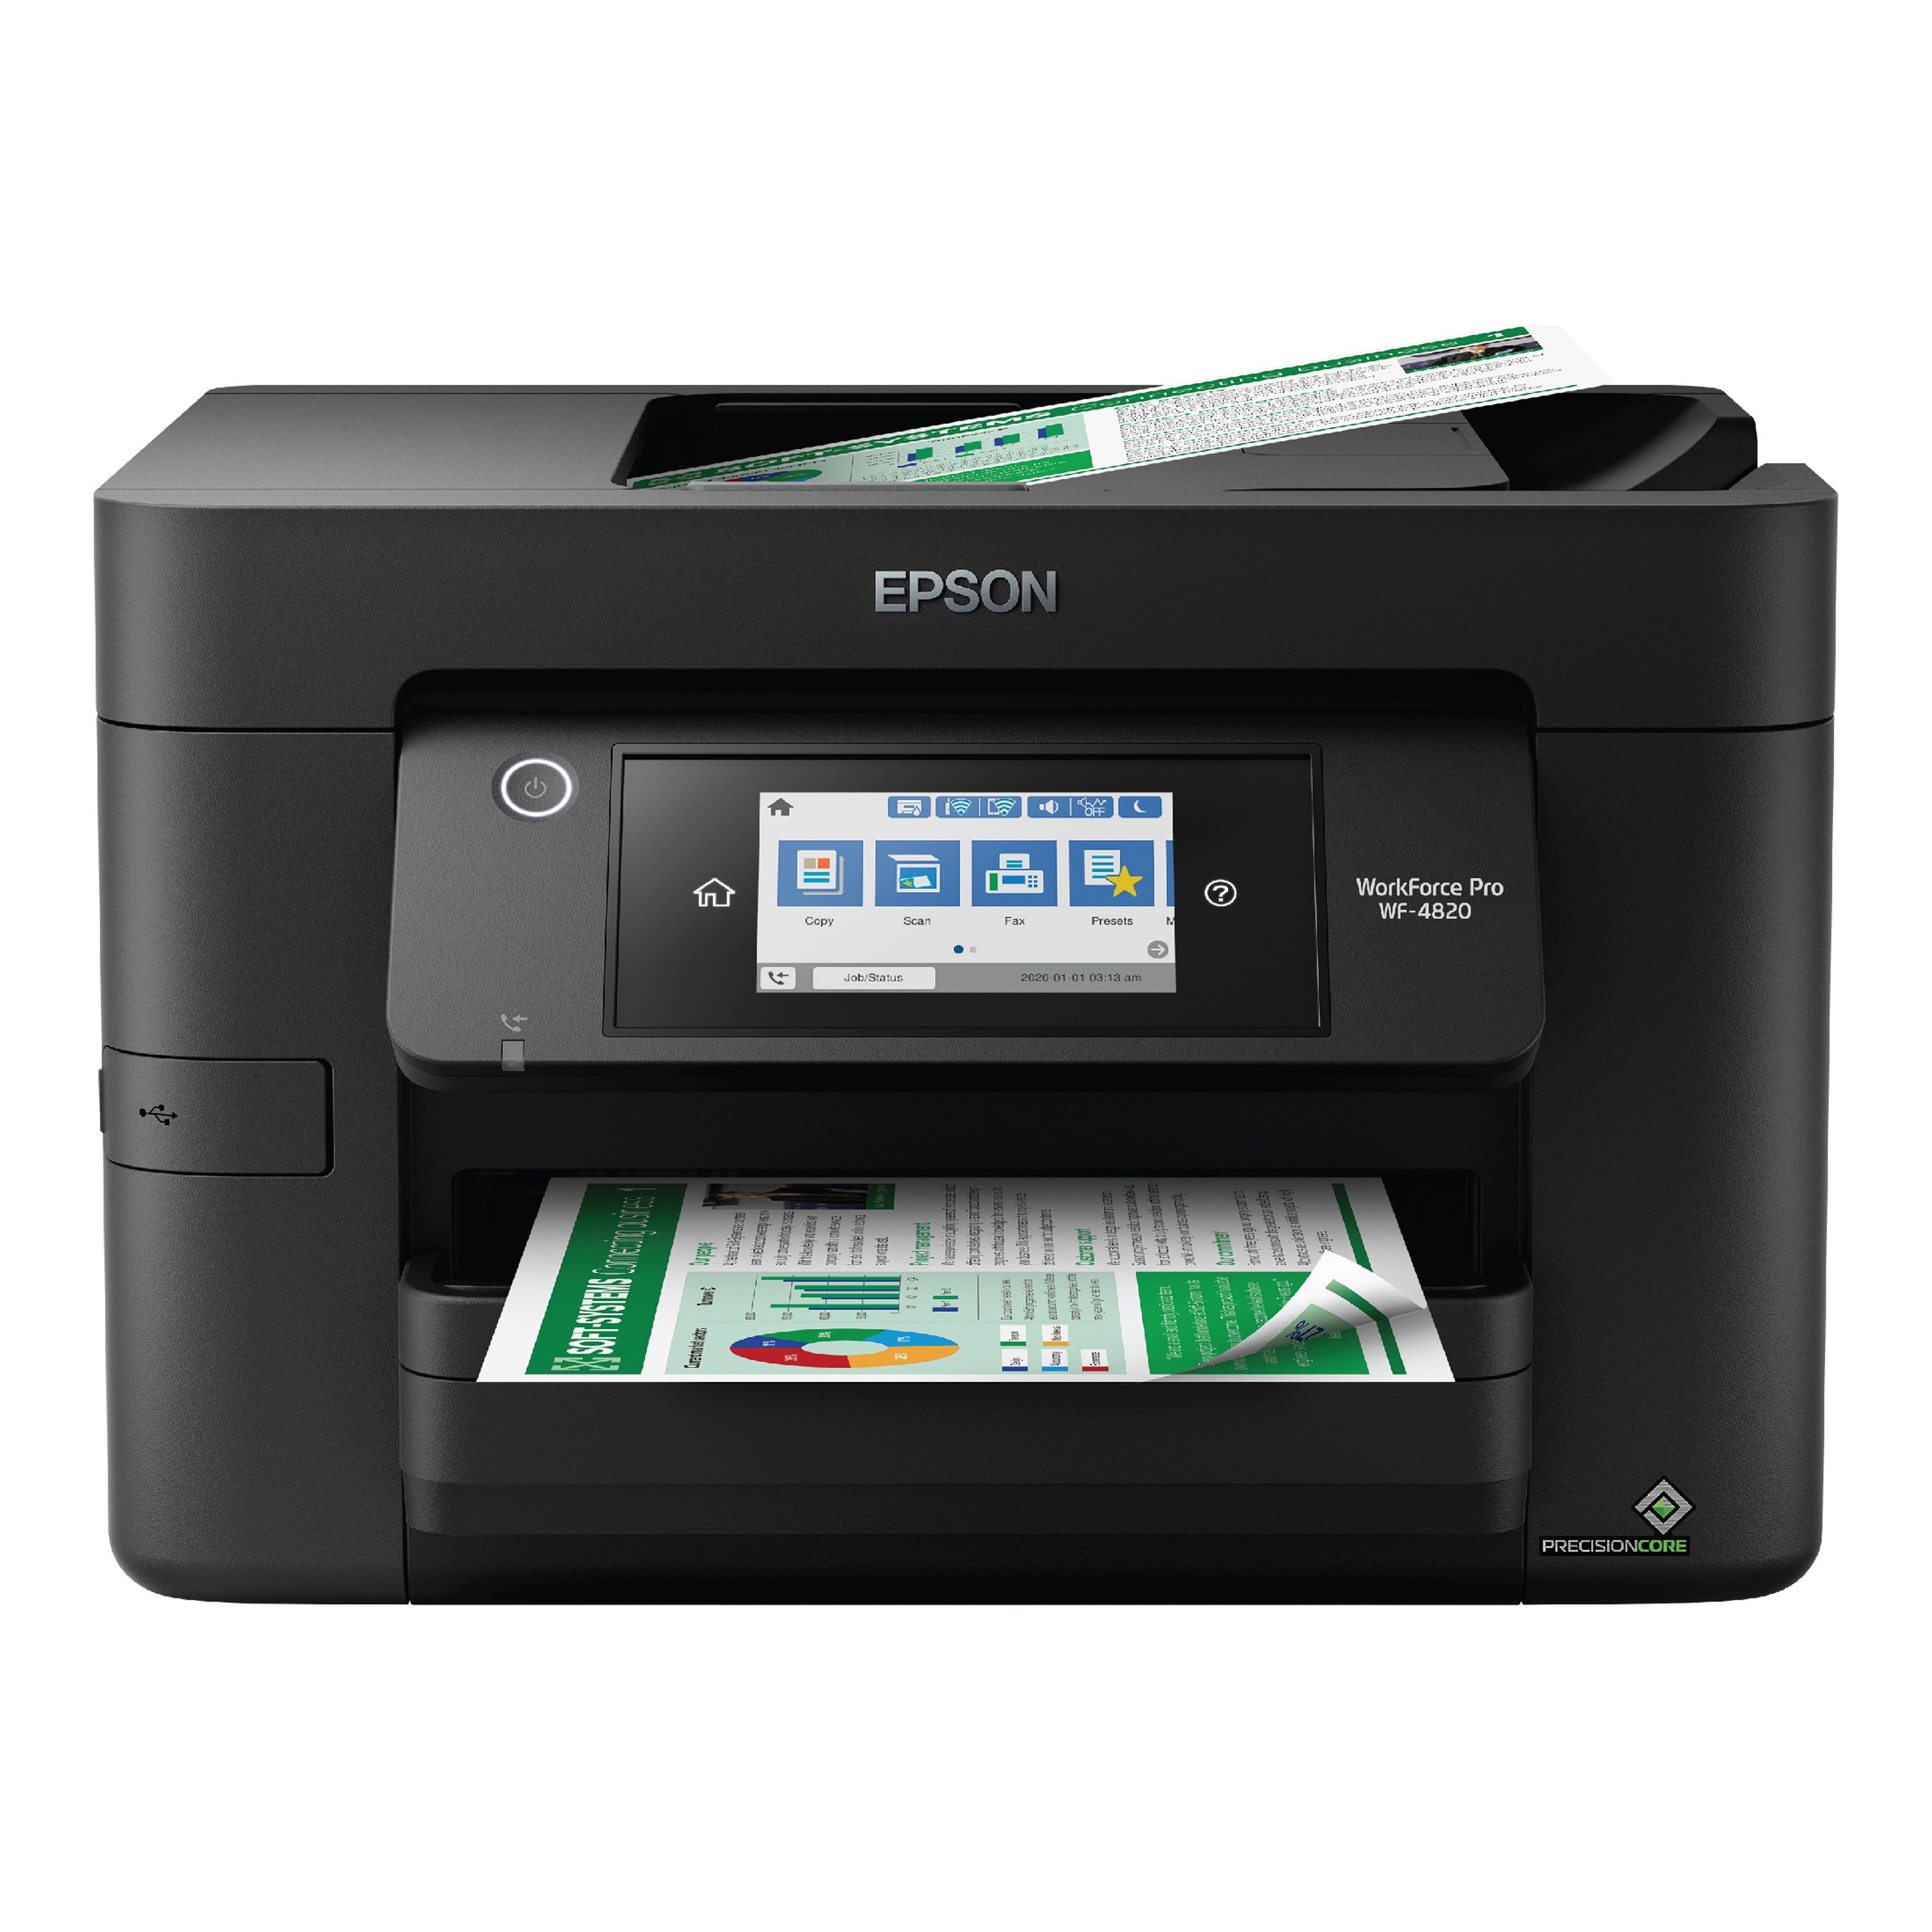 Epson WorkForce Pro WF-4820 Wireless All-in-One Printer with Auto 2-sided Printing, 35-page ADF, 250-sheet Paper Tray and 4.3" Color Touchscreen - image 1 of 6